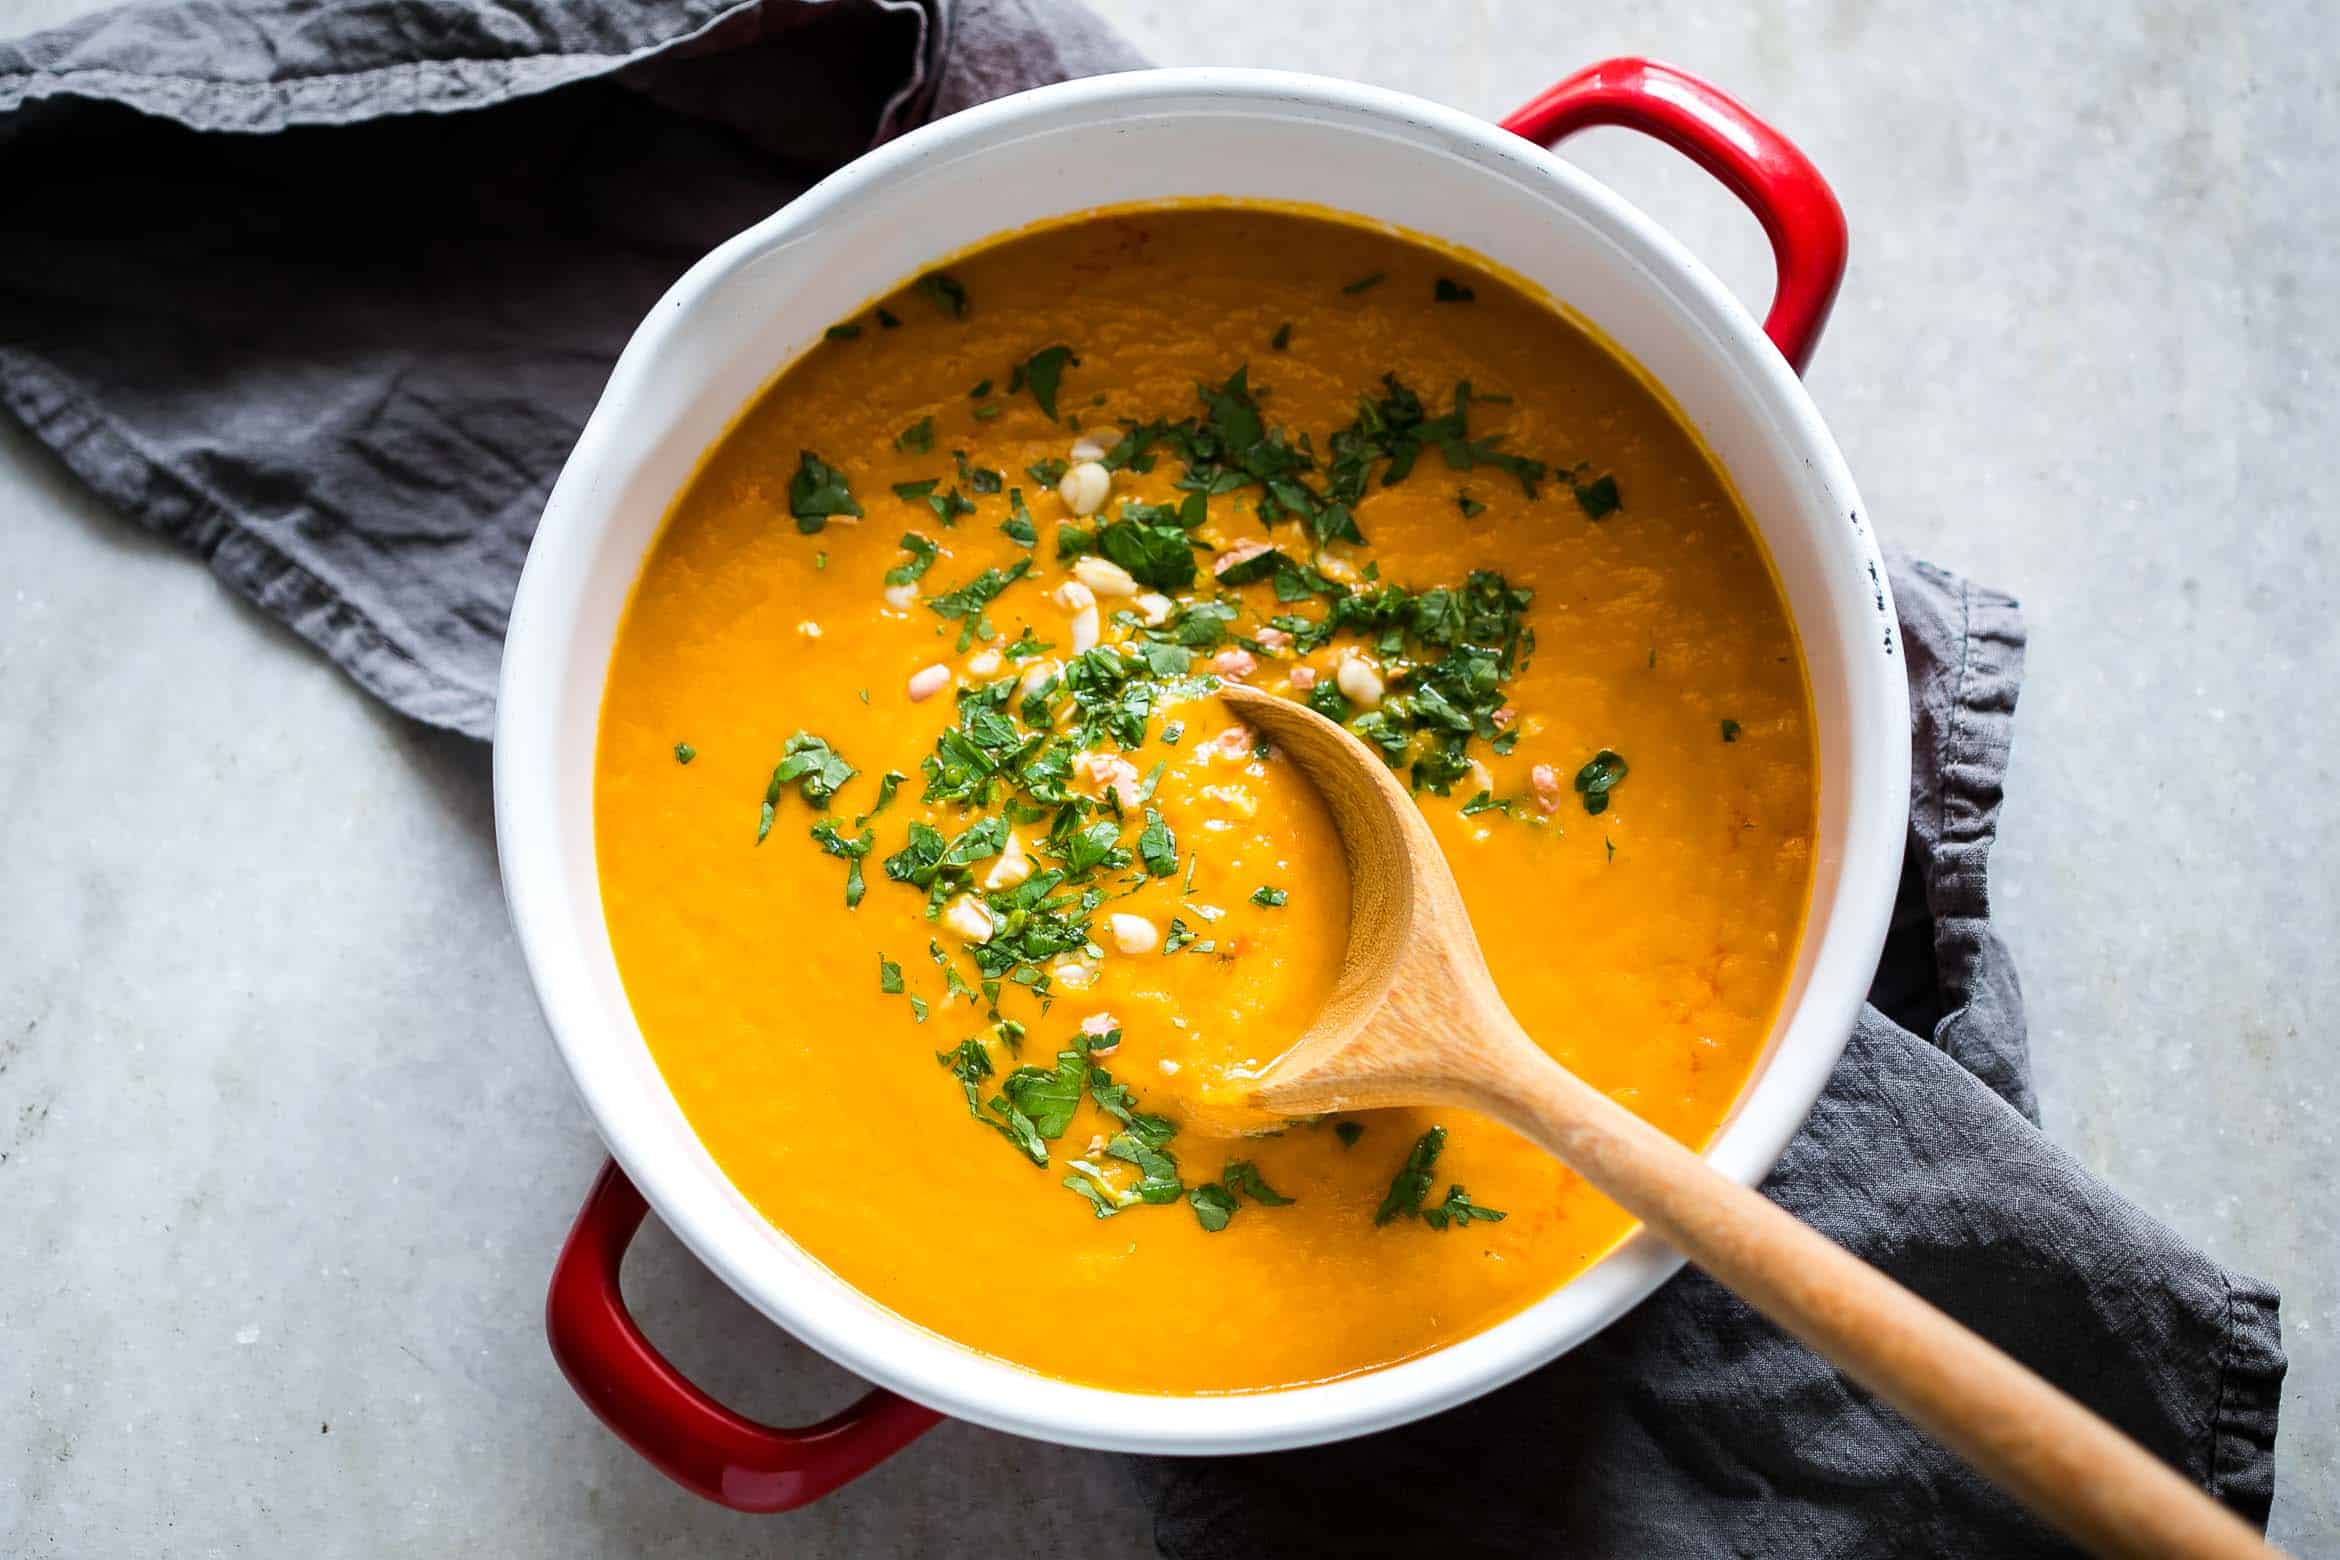 This Thai ginger carrot soup is pure comfort food and is ready in under thirty minutes if you make it in a pressure cooker. The flavours are bold, the texture is creamy, the recipe healthy and it becomes a complete meal if you top it with some noodles!